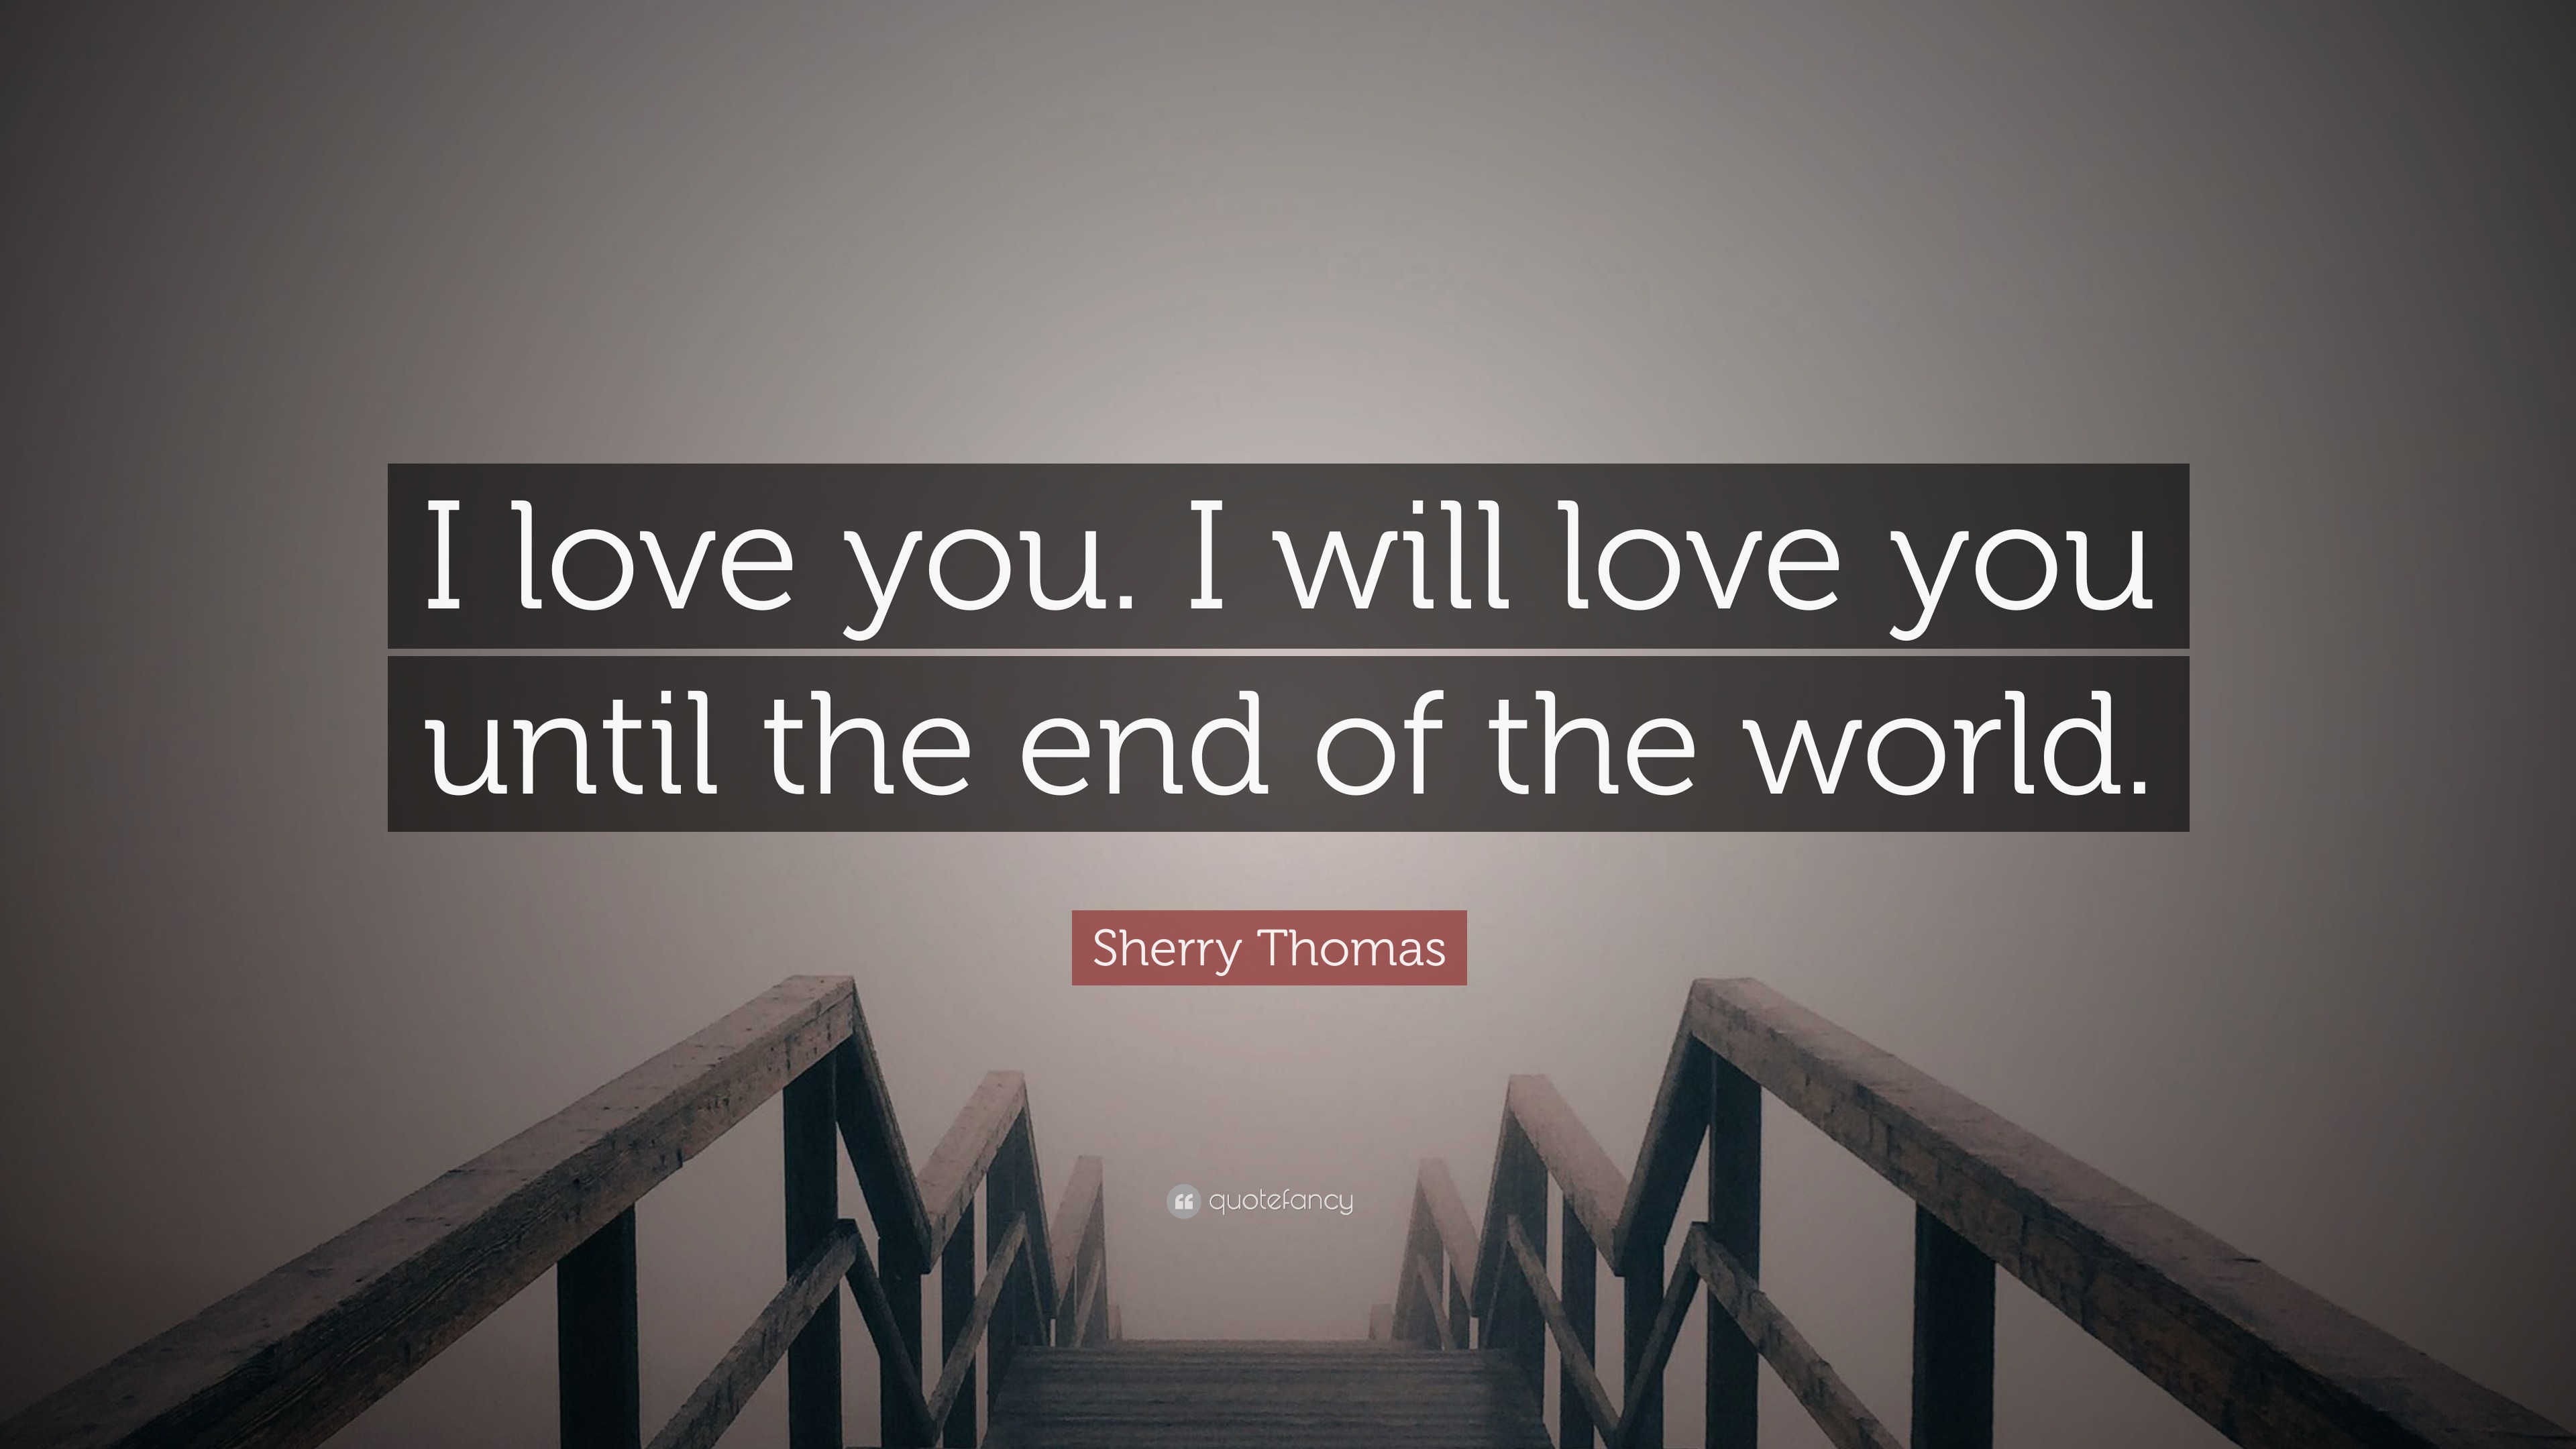 I Love You Until The End Sherry Thomas Quote: “I love you. I will love you until the end of the  world.”